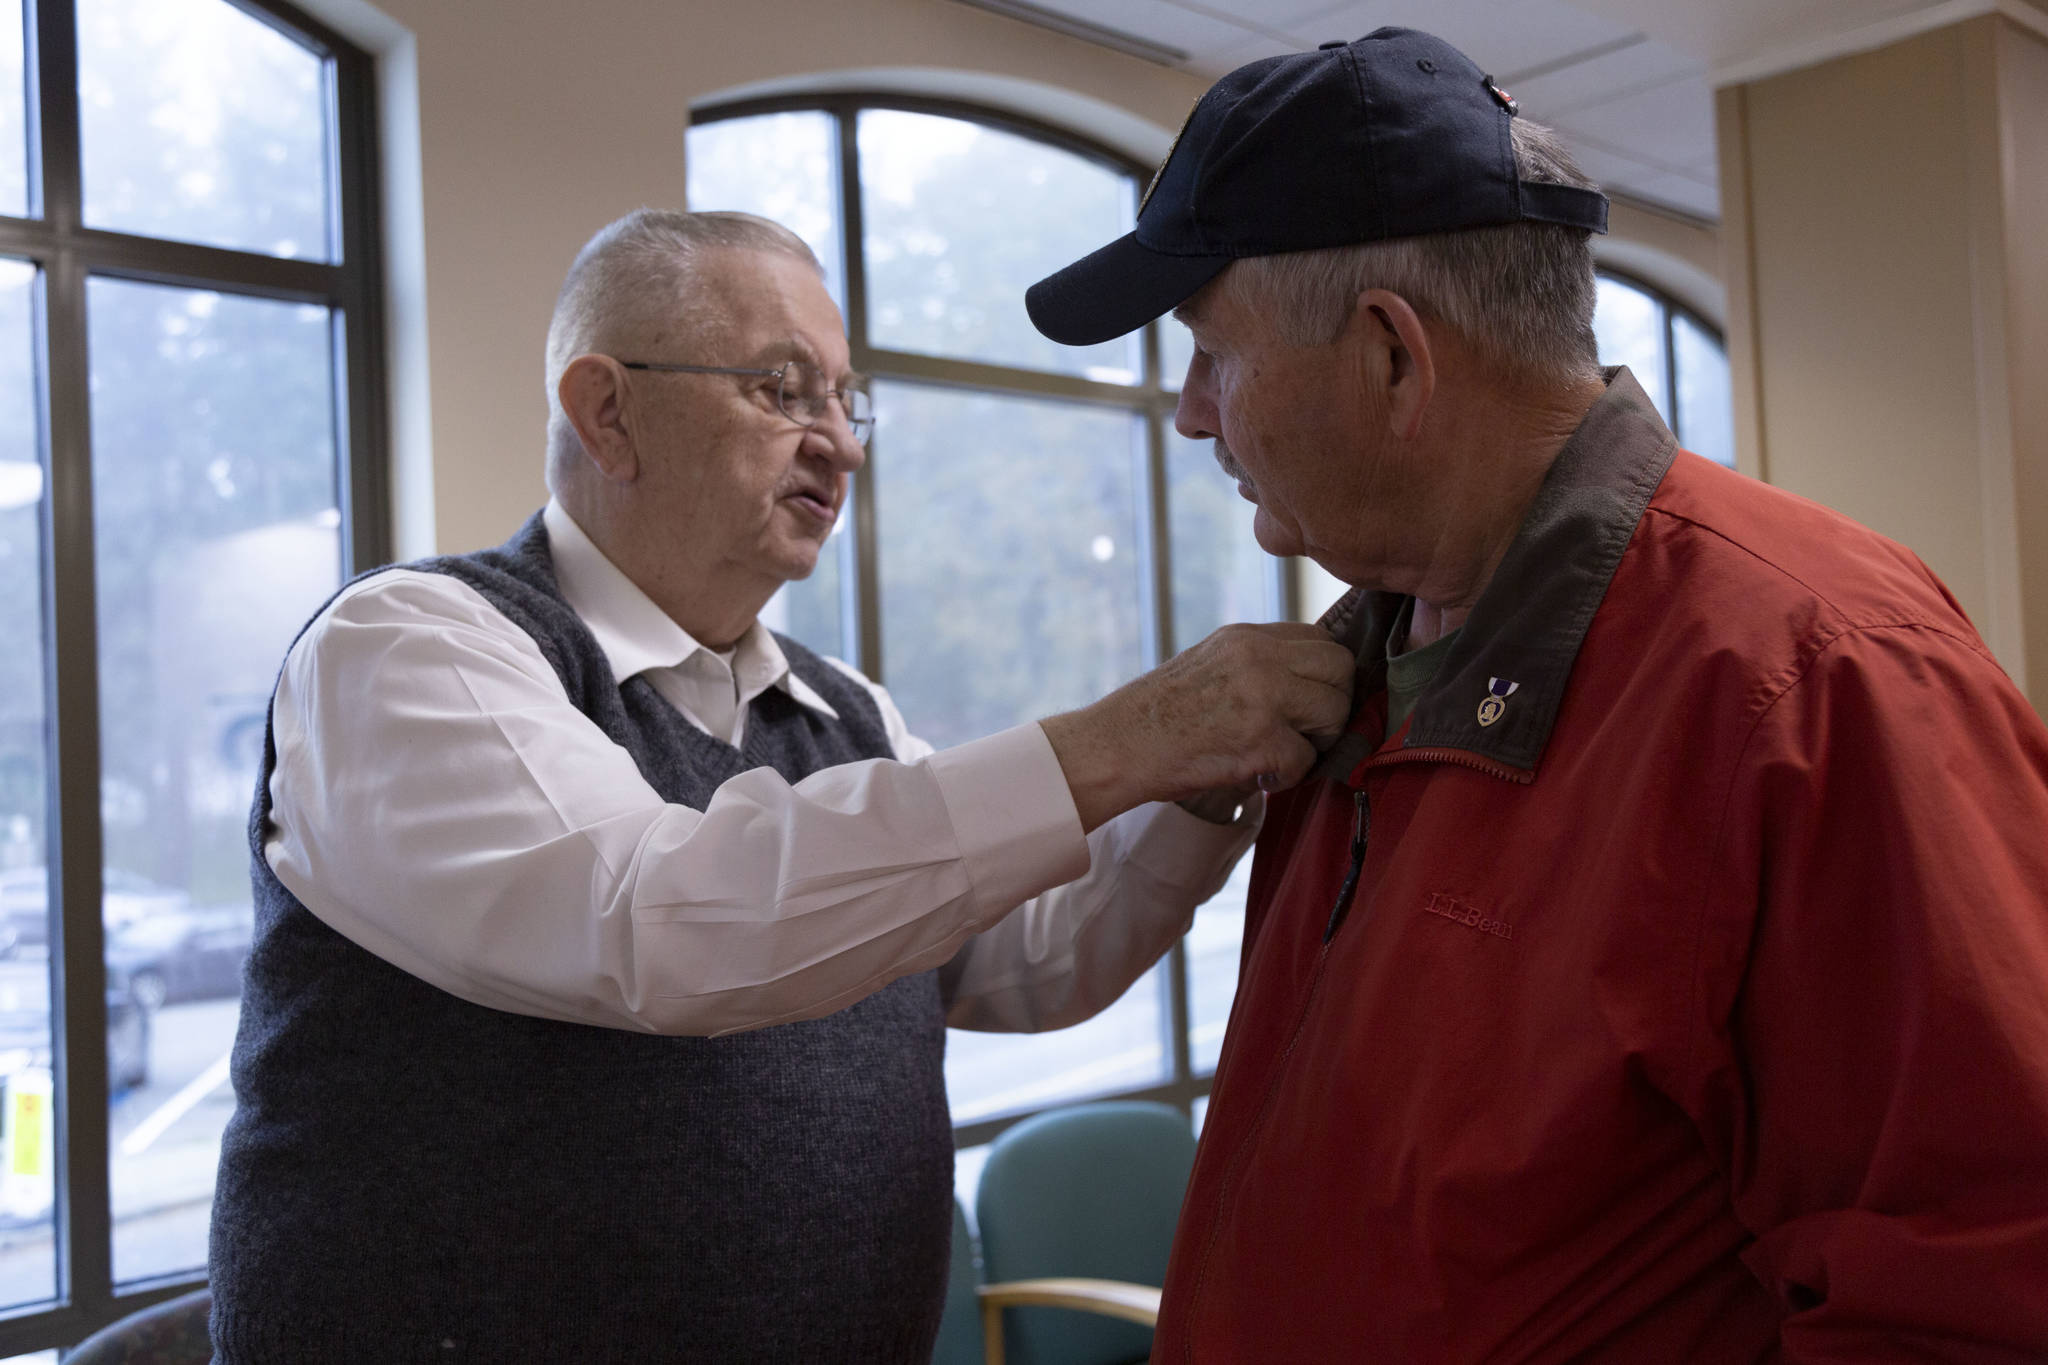 After a quick chat in the waiting room of the American Lake VA Medical Center, Jim Curtis, right, is given a small American flag pin by a fellow veteran. Curtis was there drawing attention to his fundraising efforts. Staff photos / Ashley Hiruko